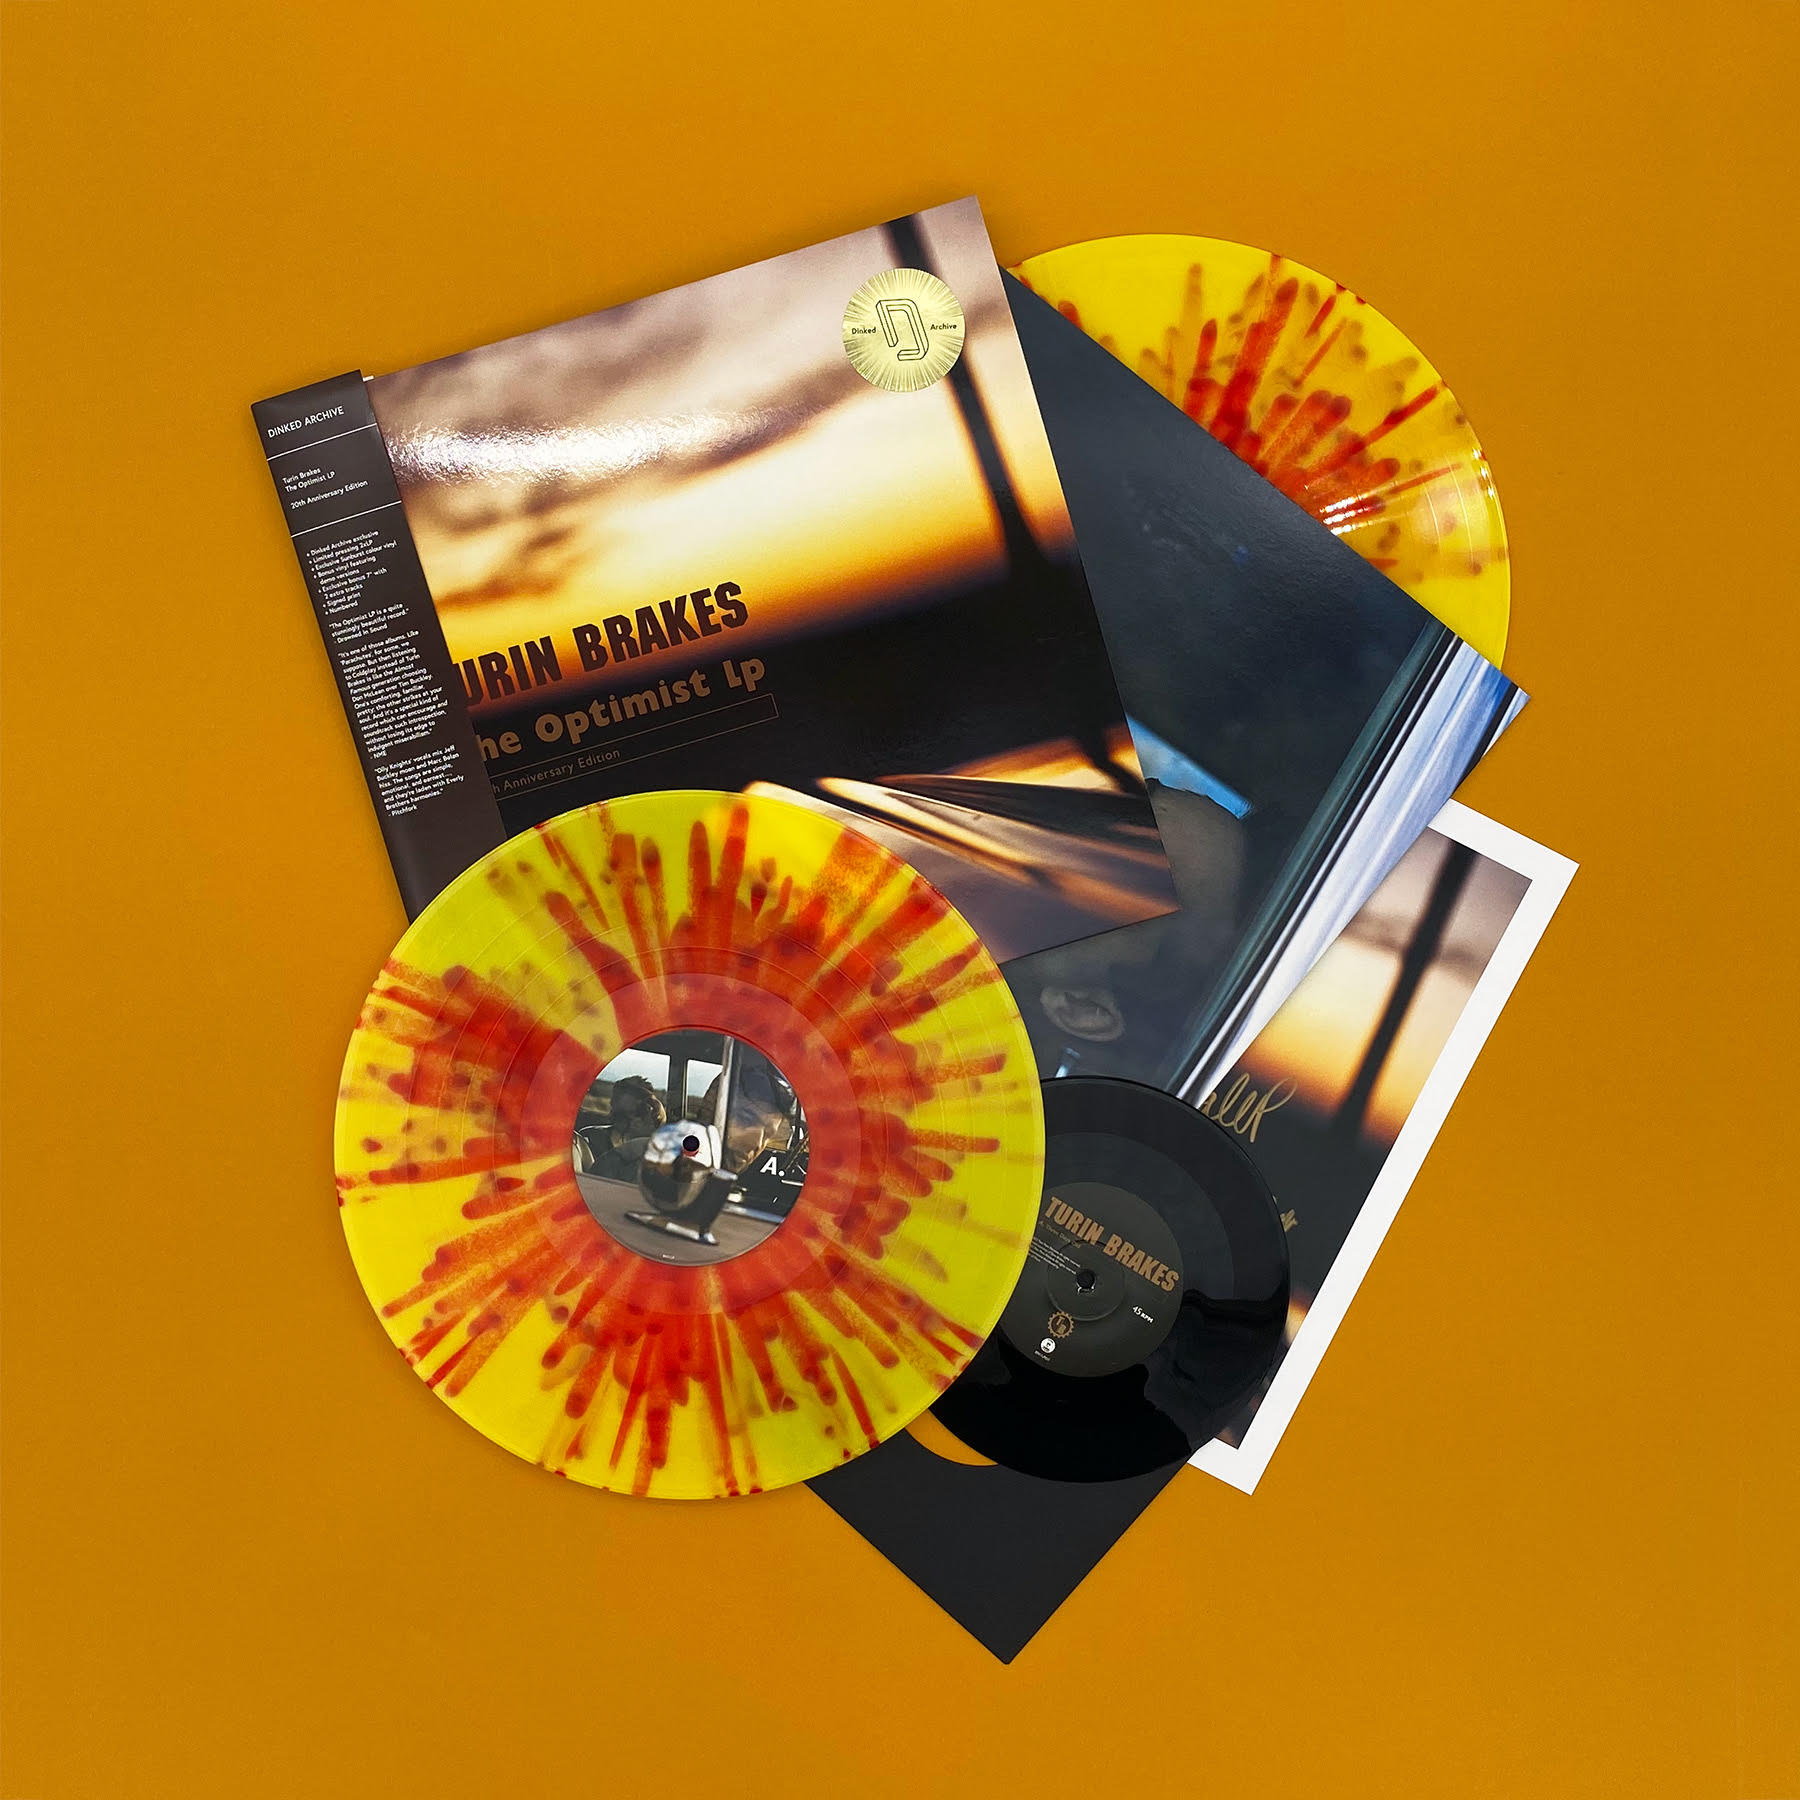 Turin Brakes – The Optimist LP – Dinked Edition OUT NOW